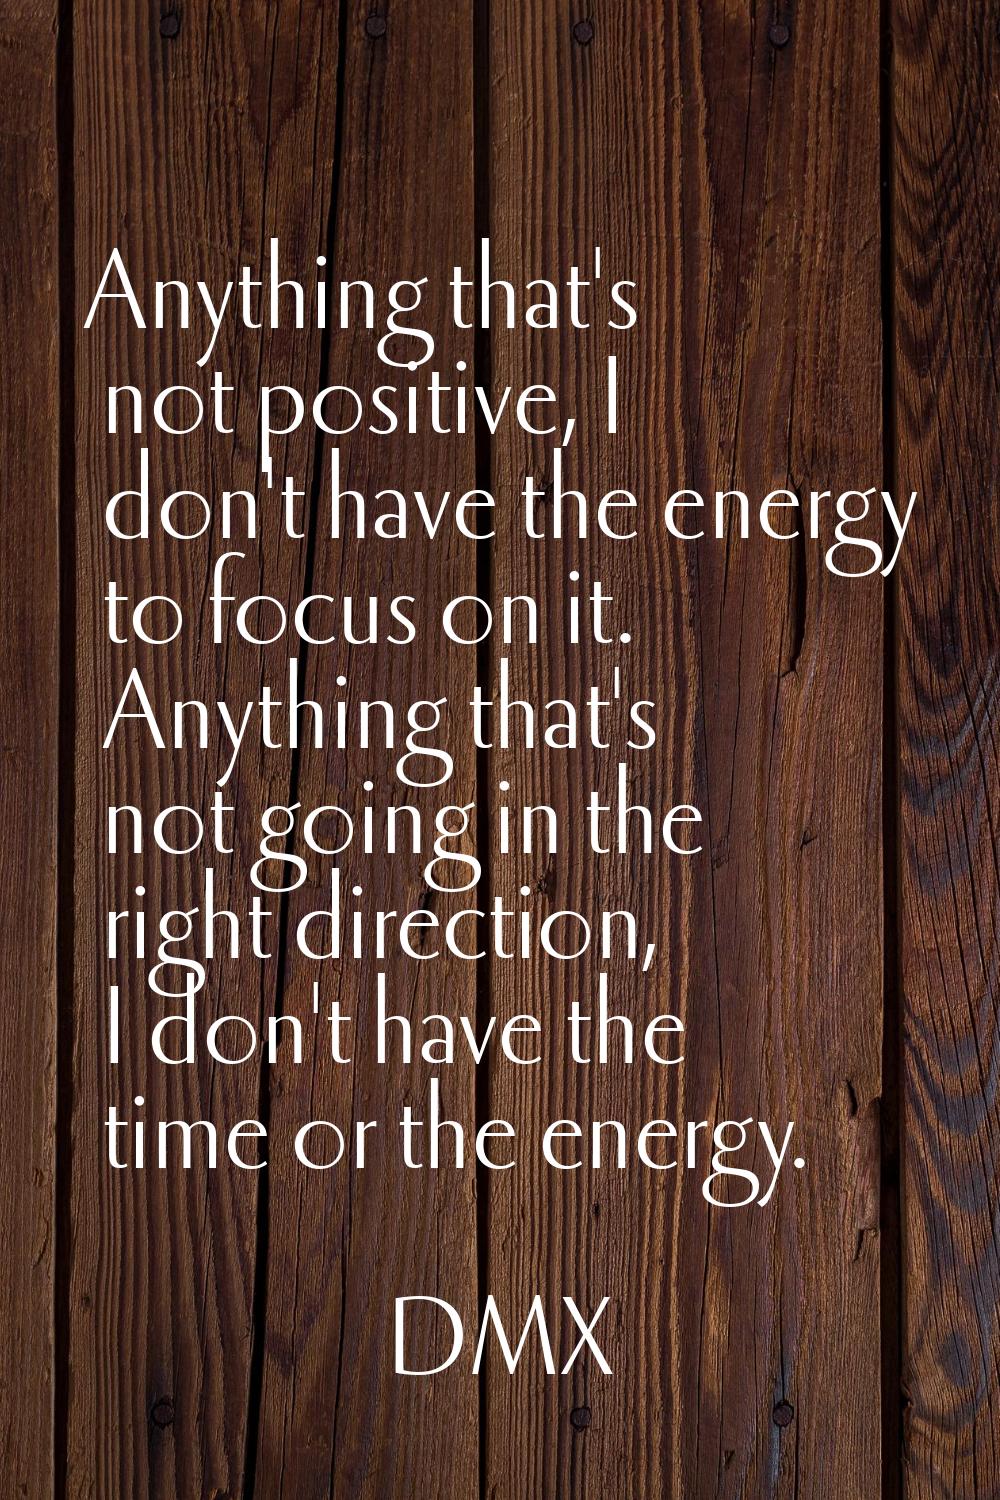 Anything that's not positive, I don't have the energy to focus on it. Anything that's not going in 